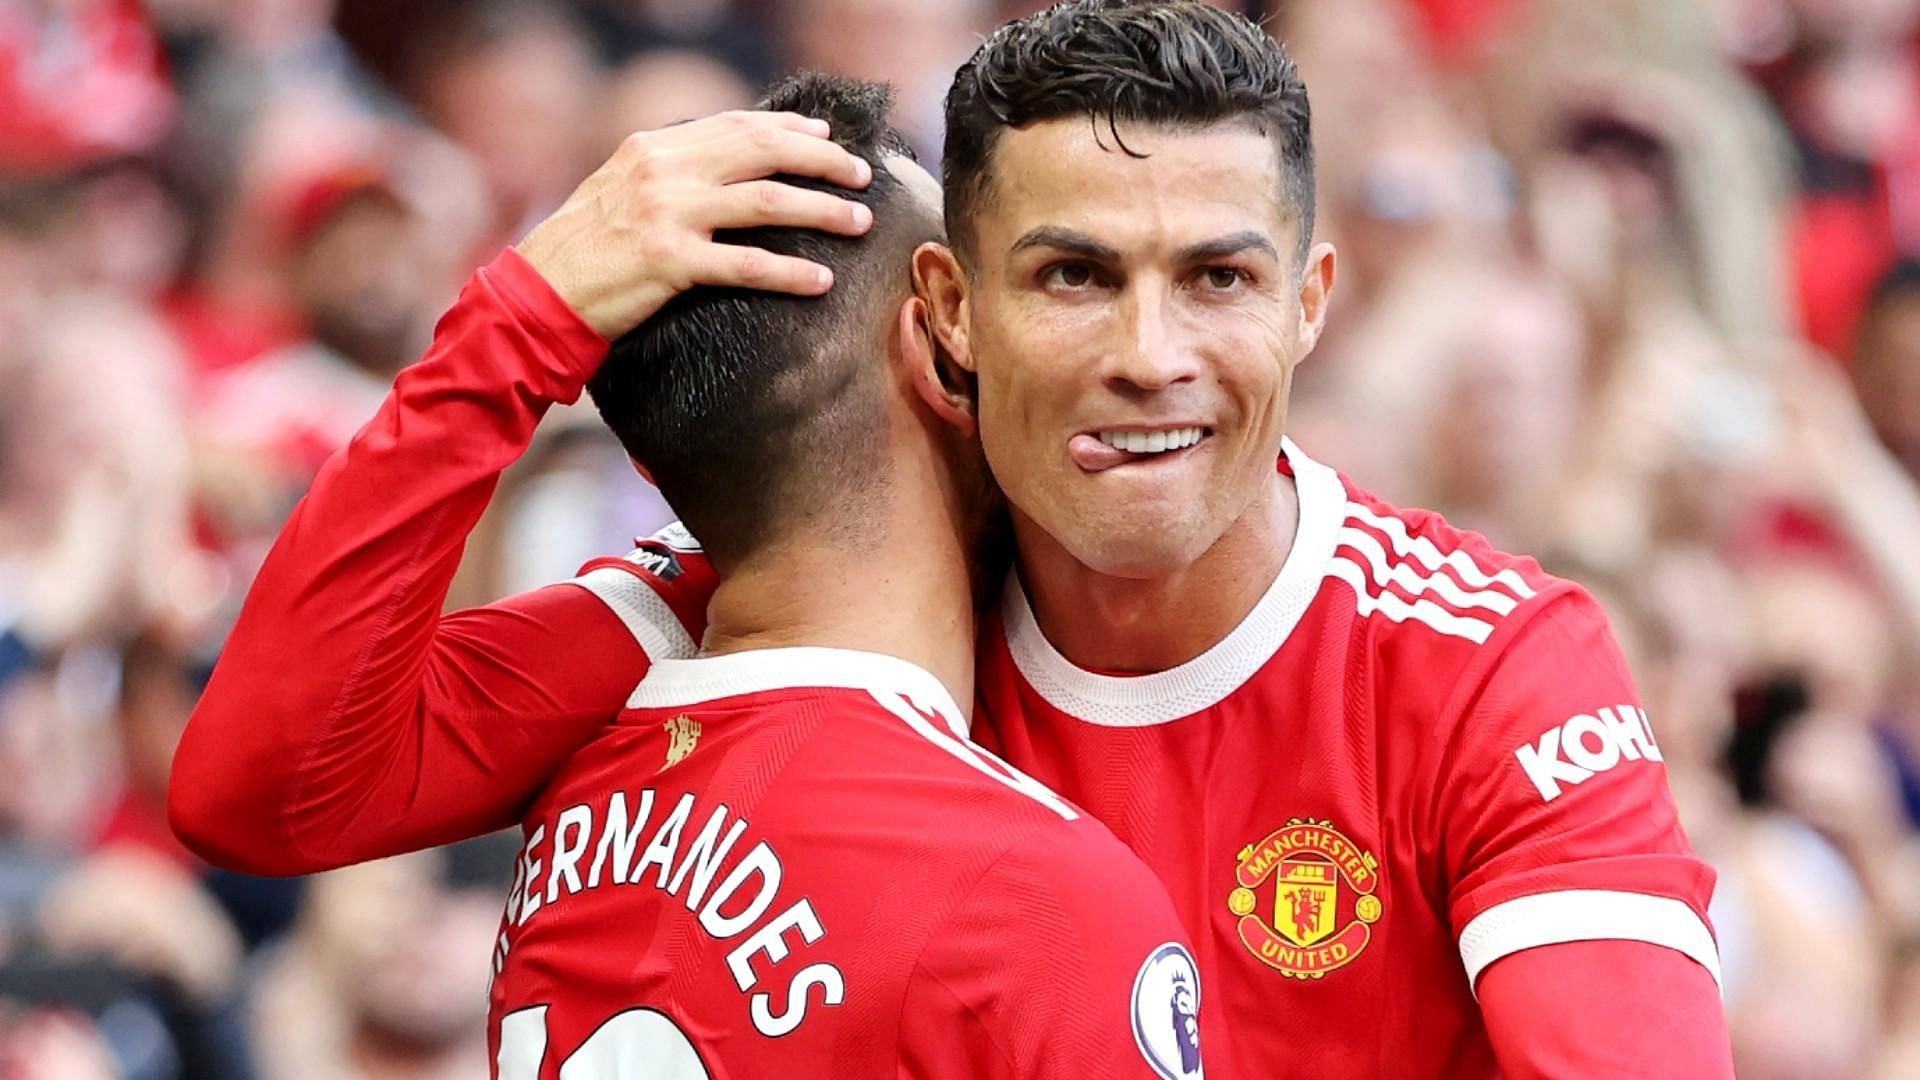 Players like Bruno Fernandes and Cristiano Ronaldo will once again be the main guys for Manchester United in FIFA 23 (Image via Getty)